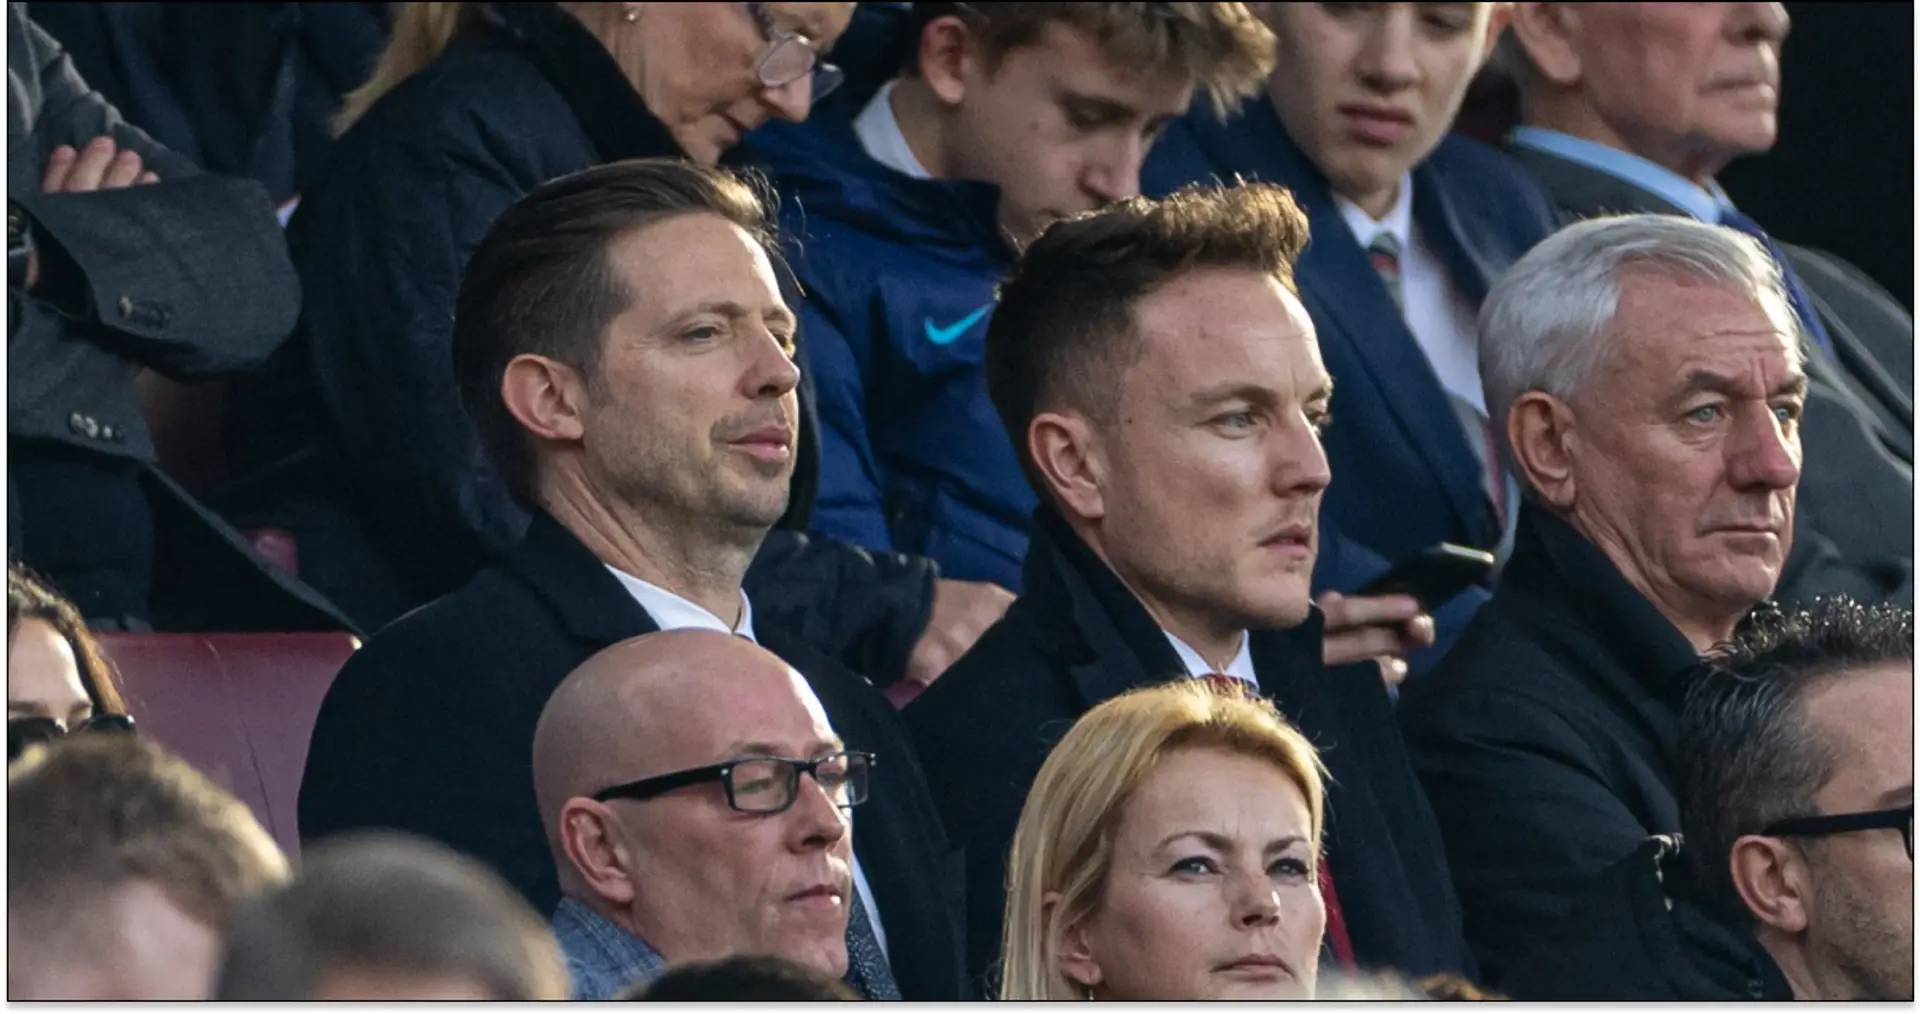 Michael Edwards in attendance at Man United v Liverpool — spotted